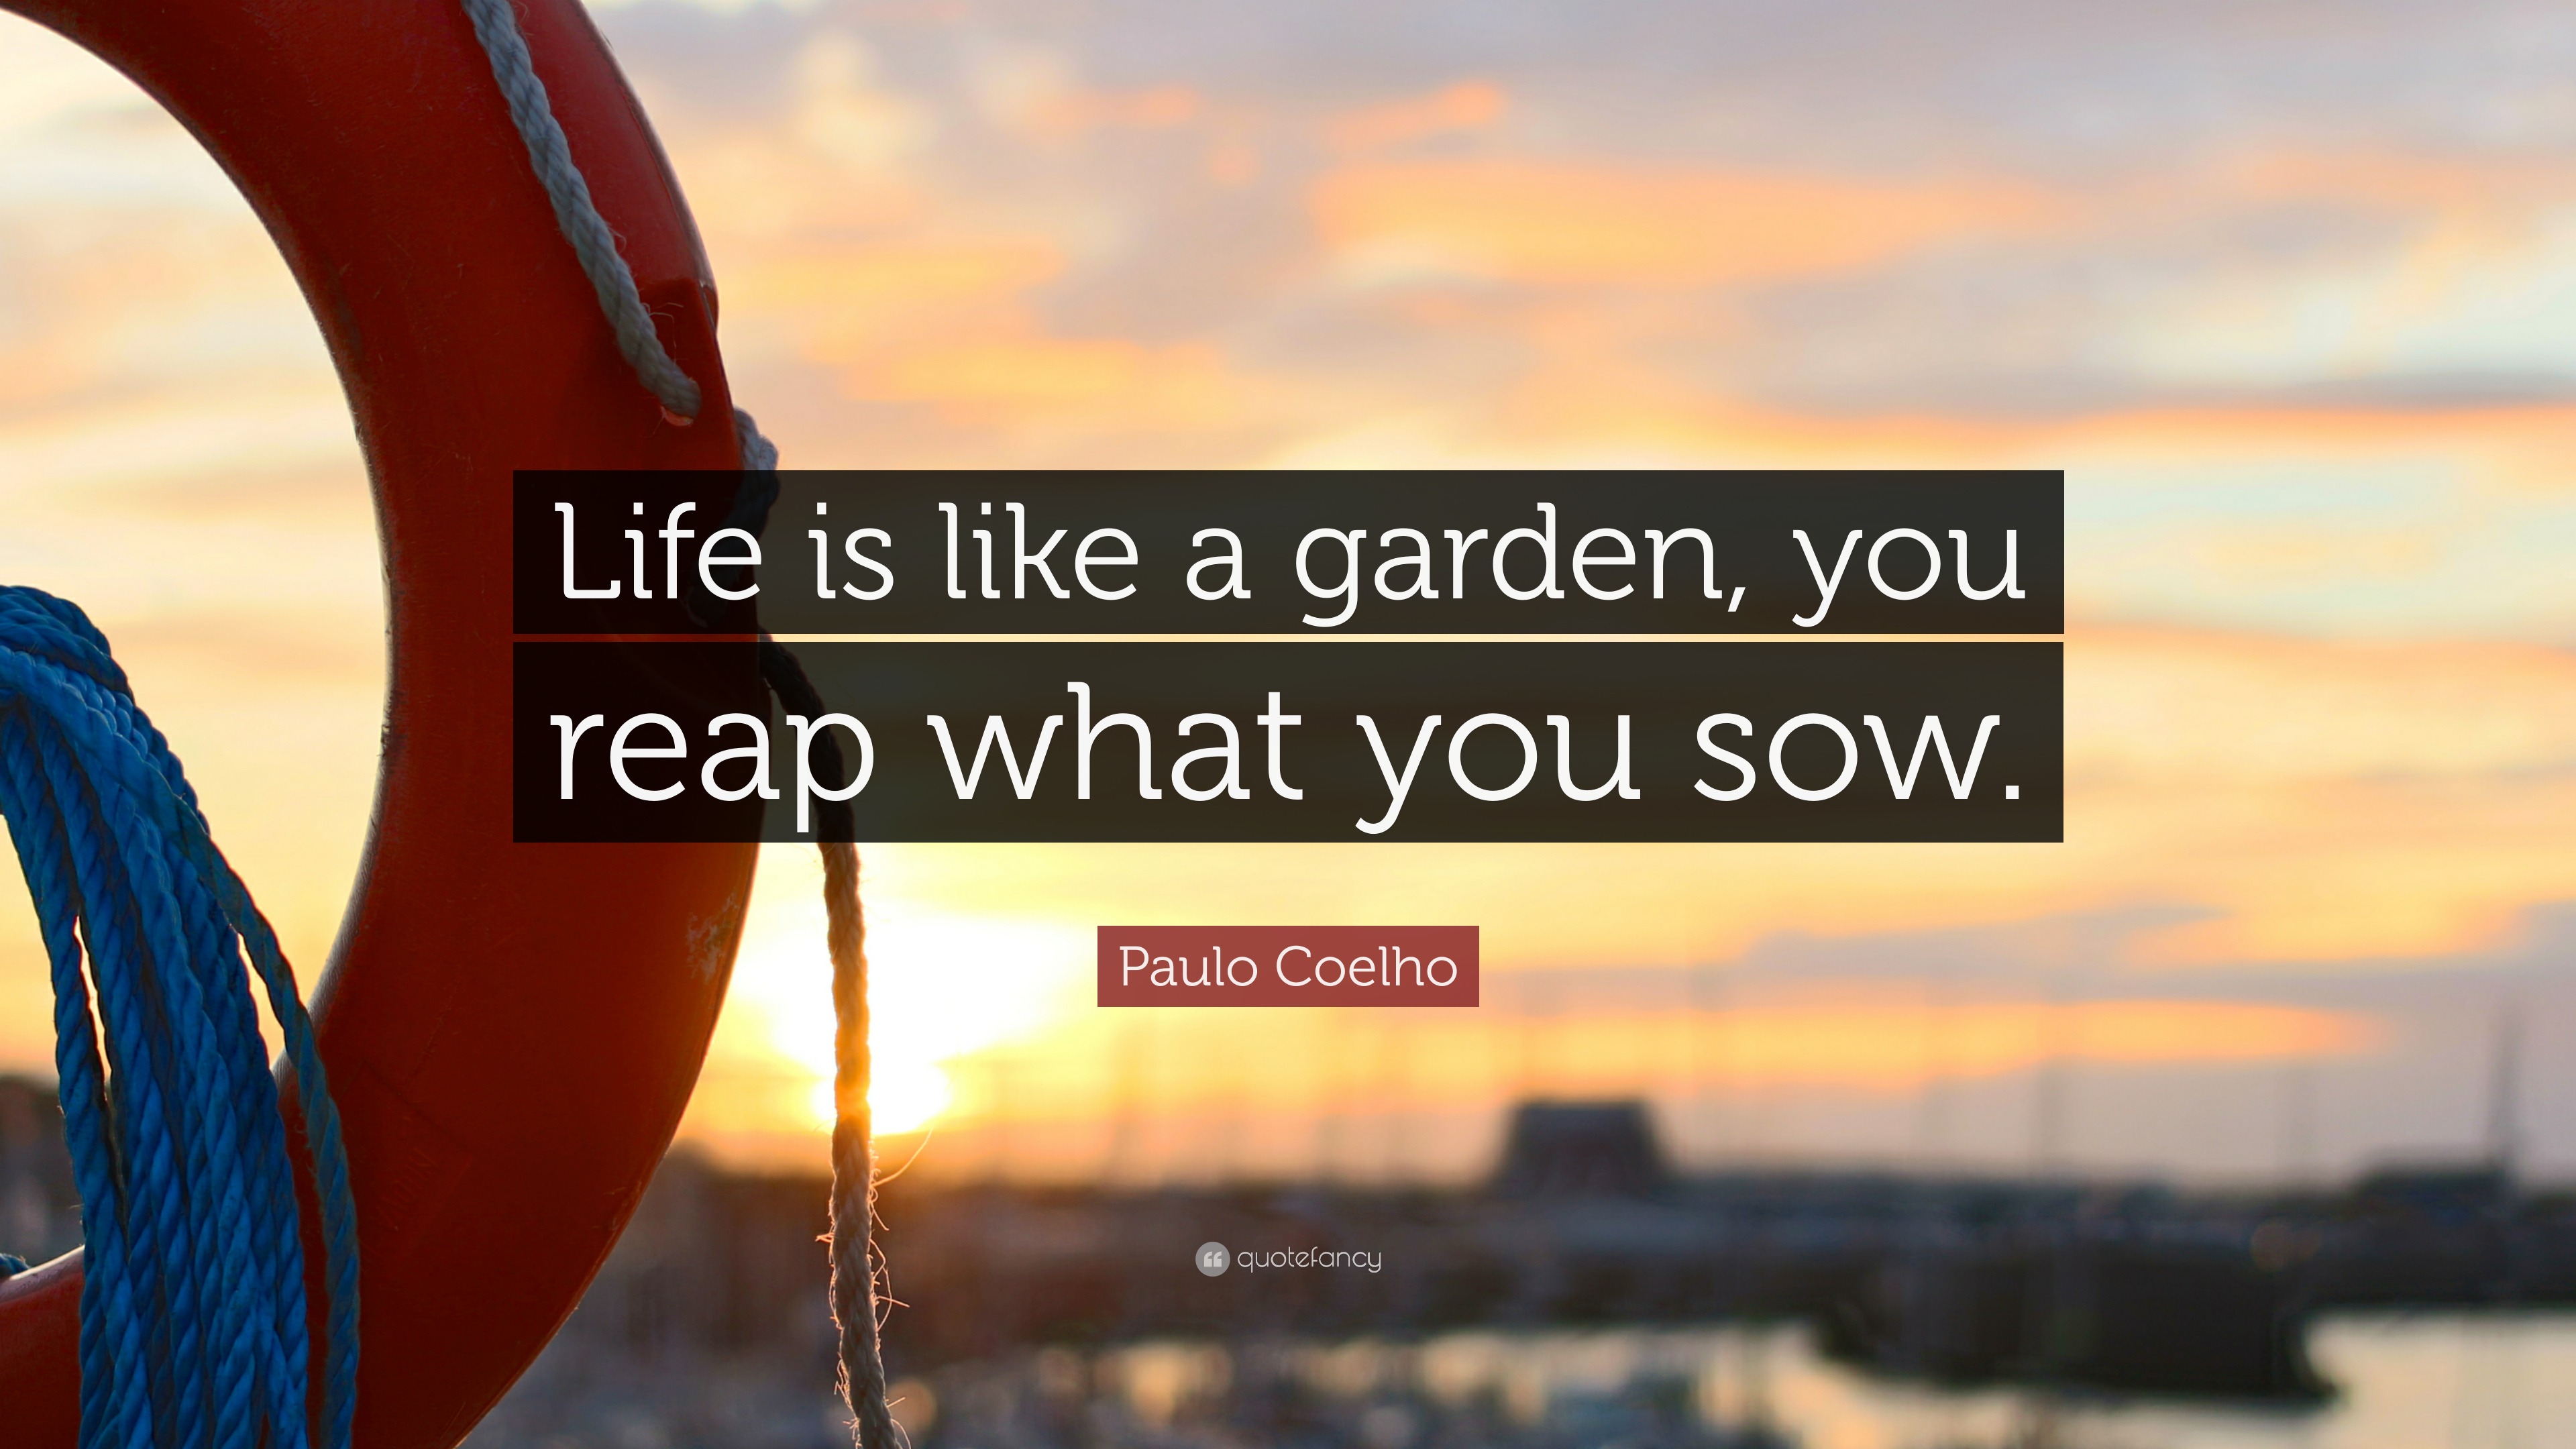 Paulo Coelho Quote “Life is like a garden you reap what you sow